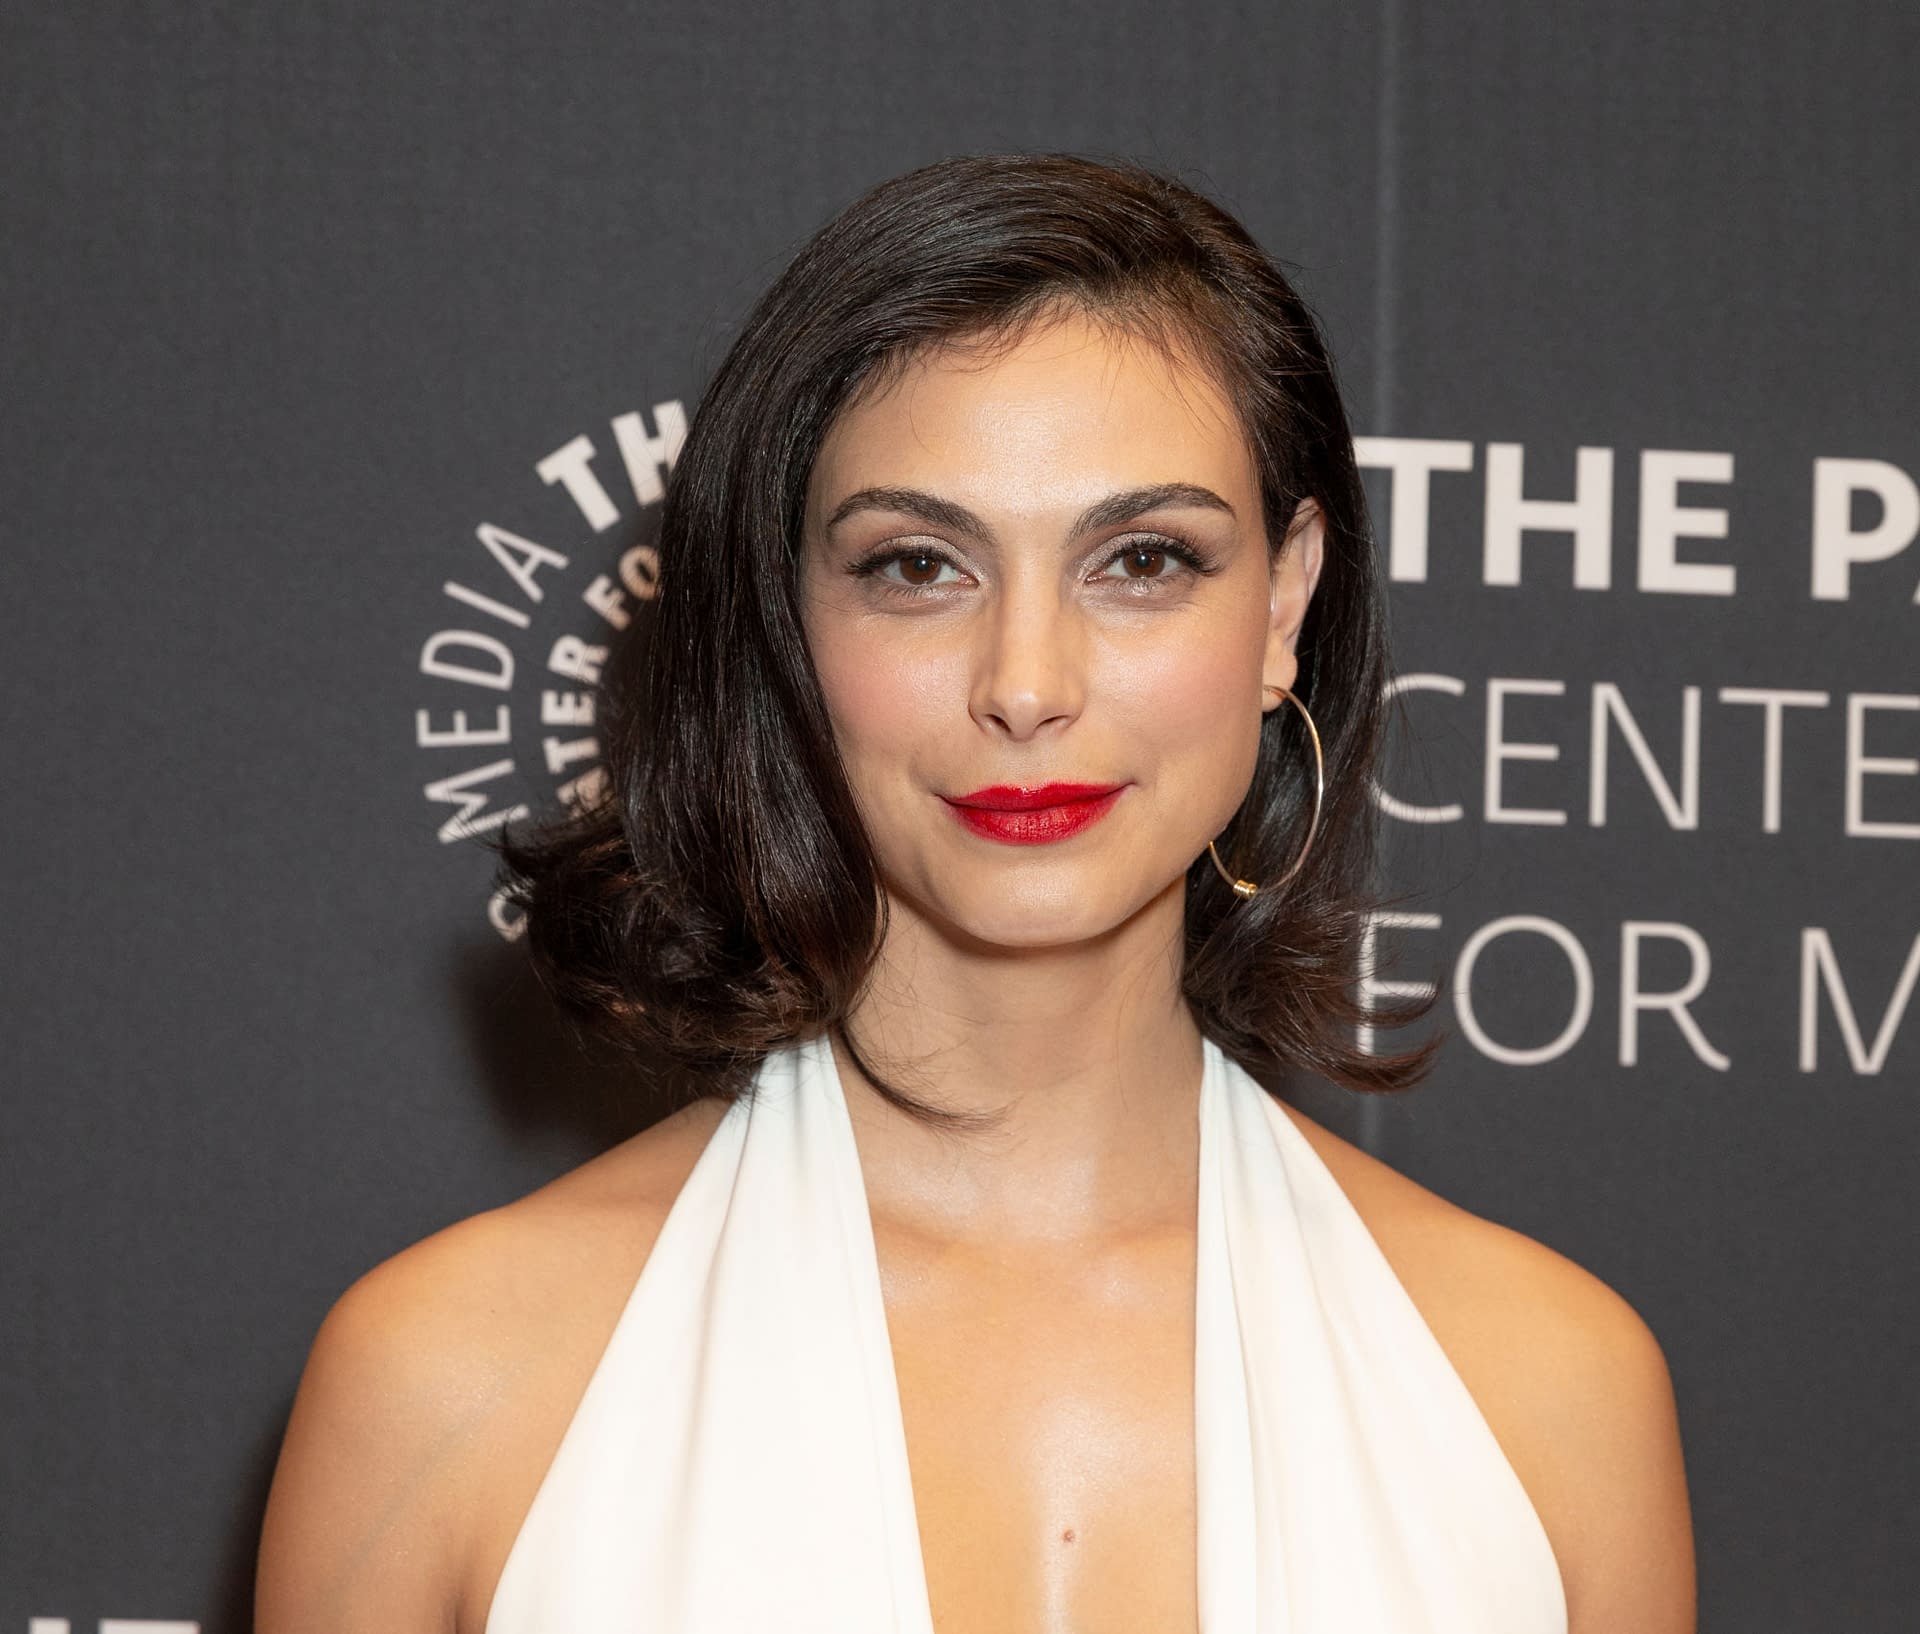 Morena Baccarin Signs on to New Sci-Fi Comedy Series